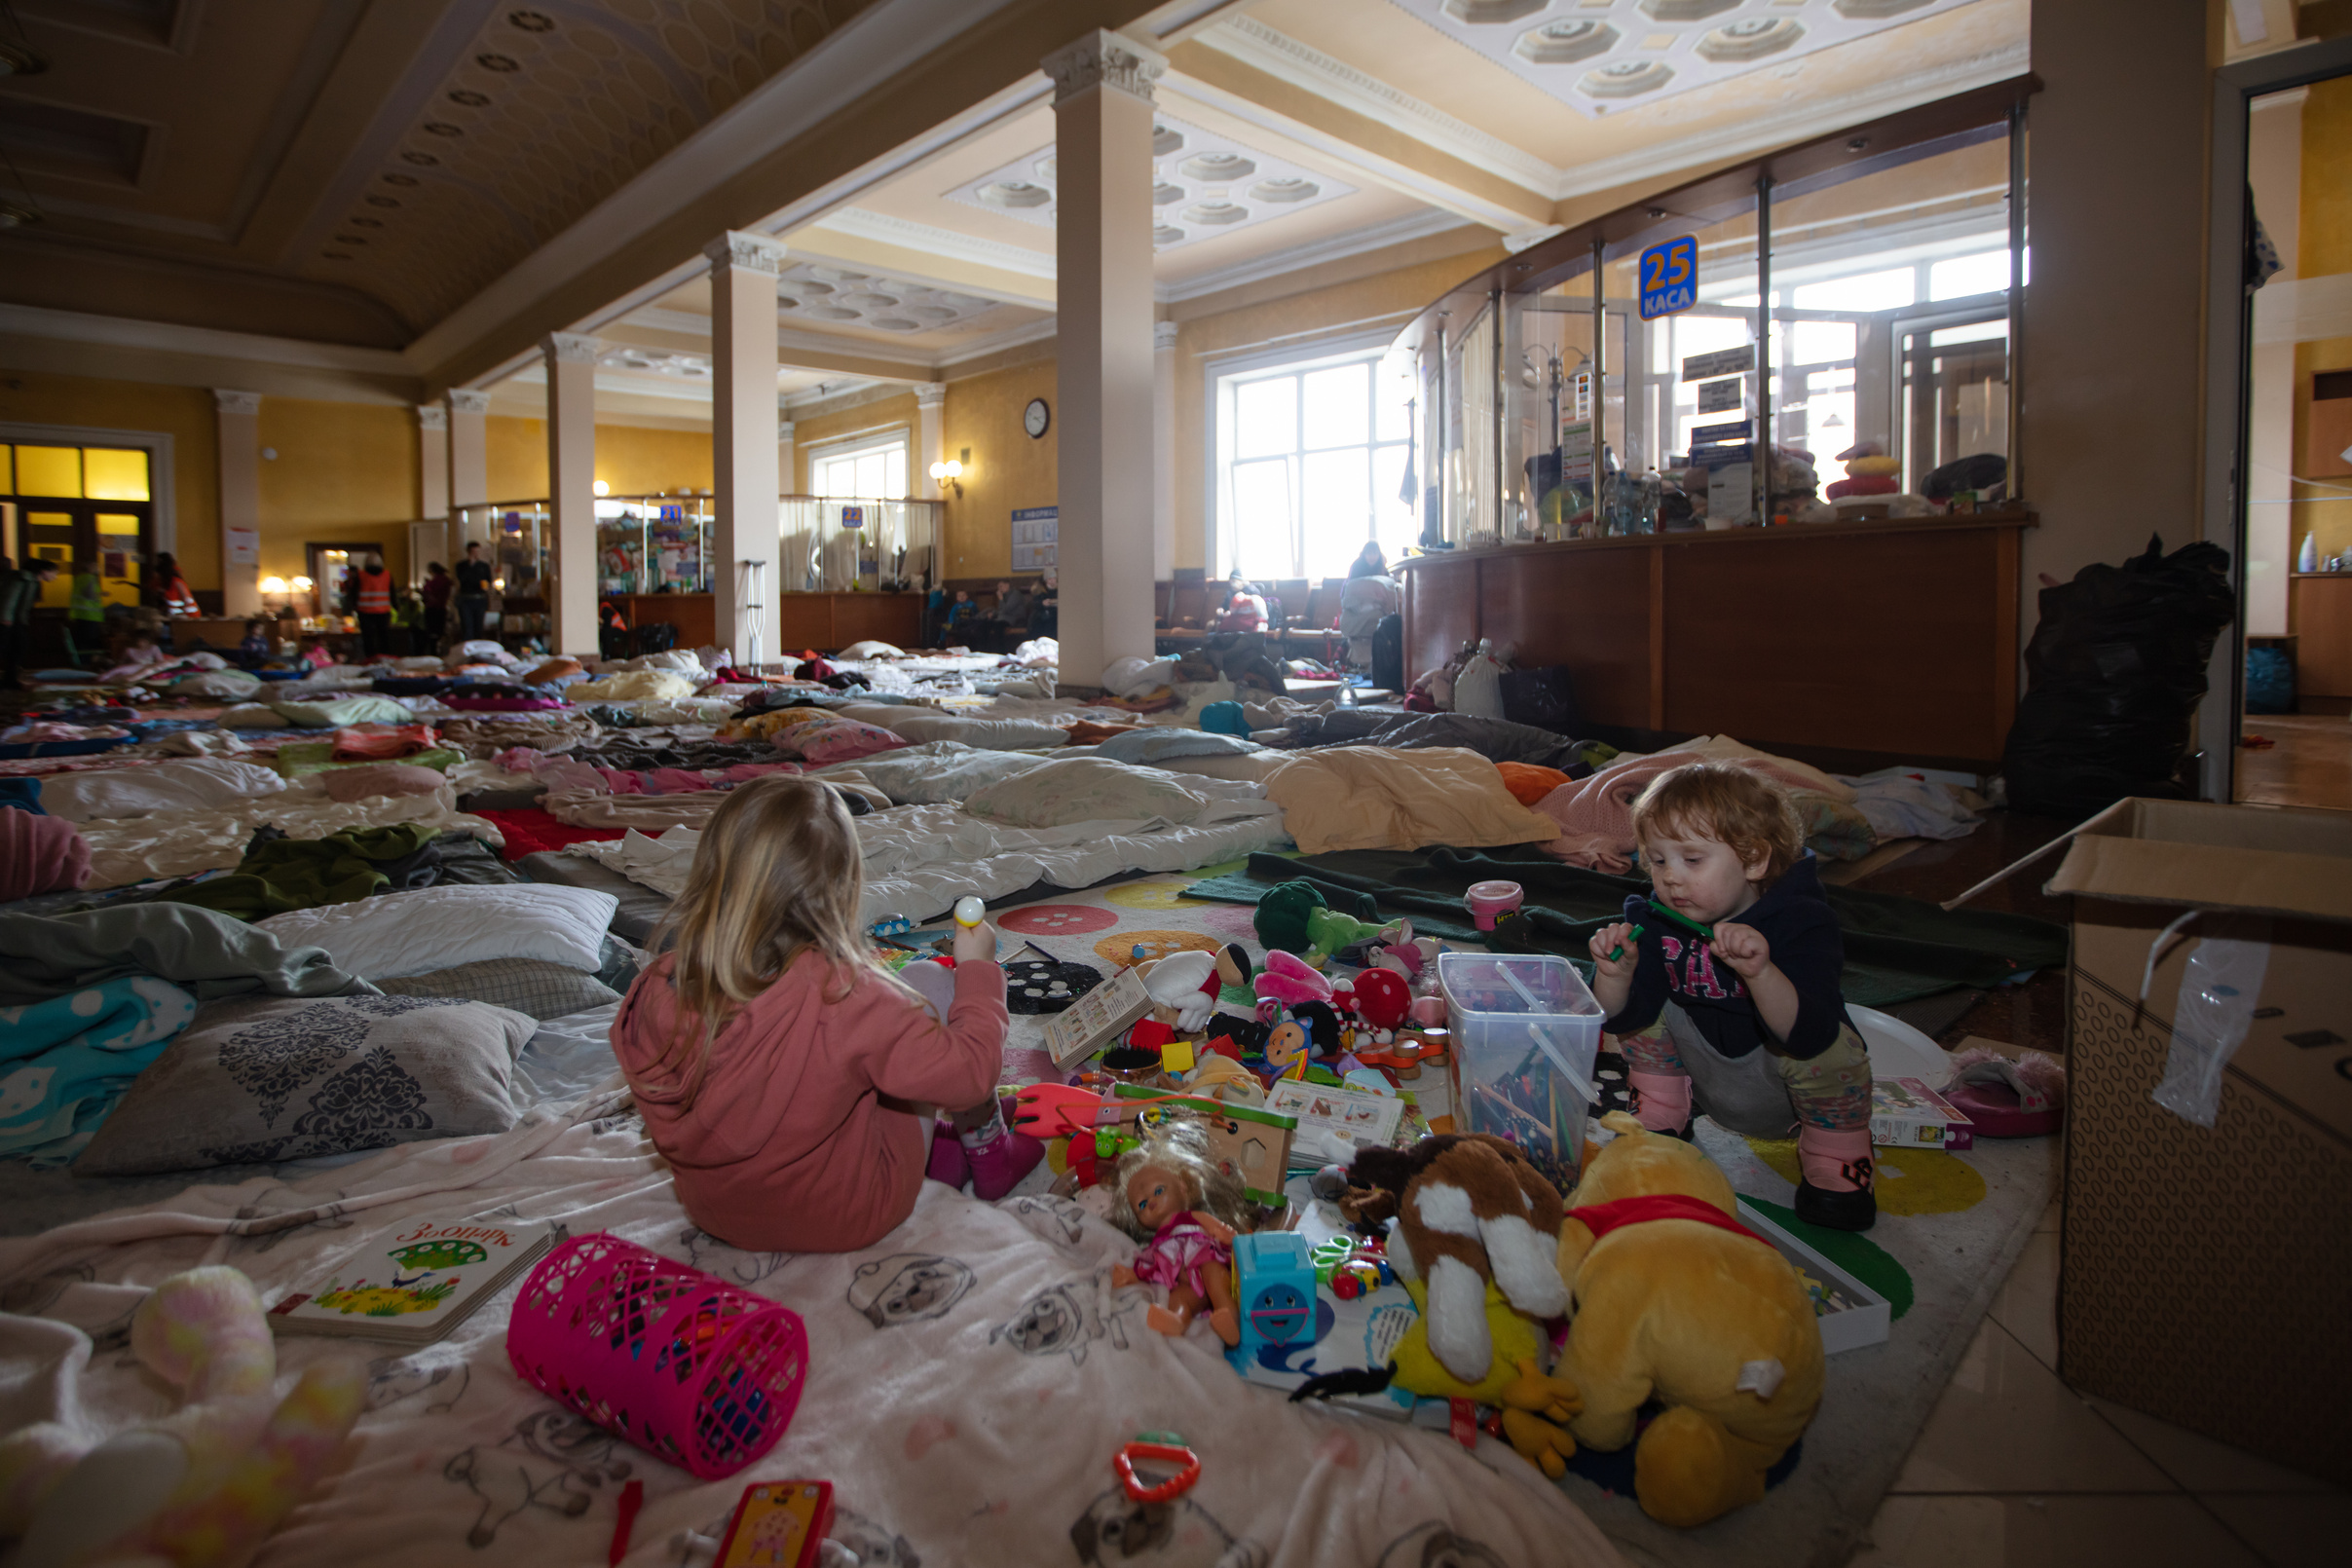 ukrainian children sit and play with toys on the floor of a railway station with sleeping bags across the floor